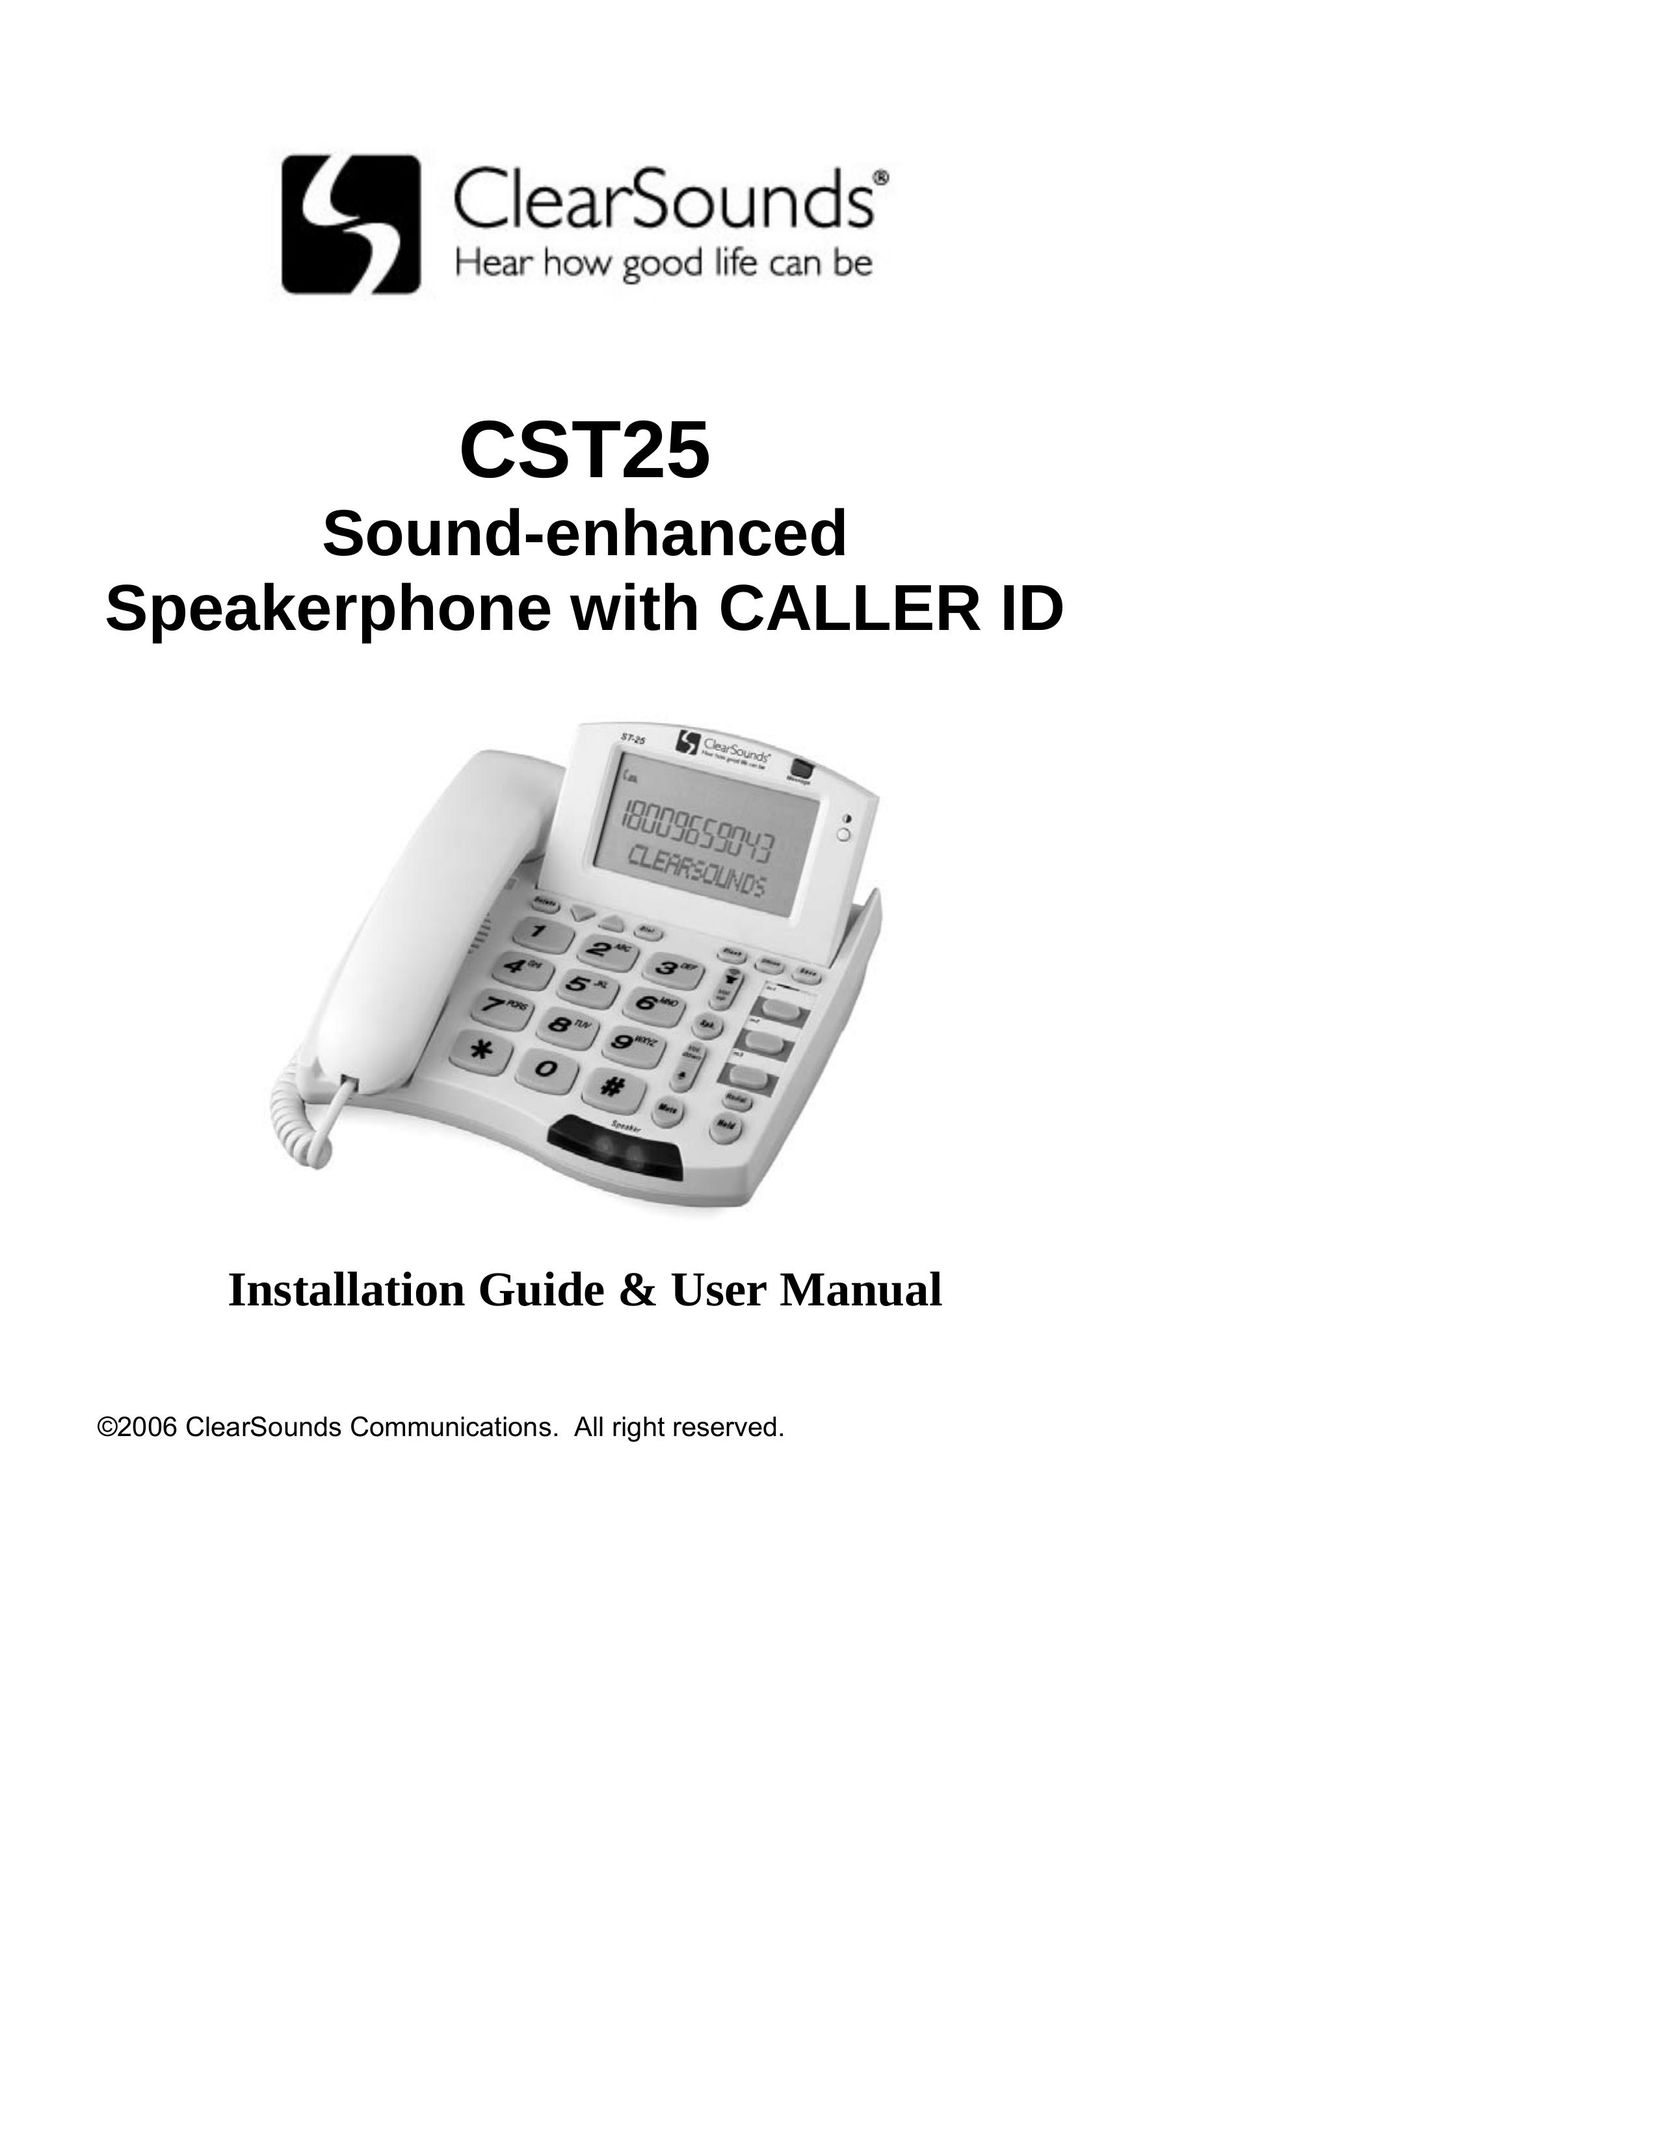 ClearSounds CST25 Telephone User Manual